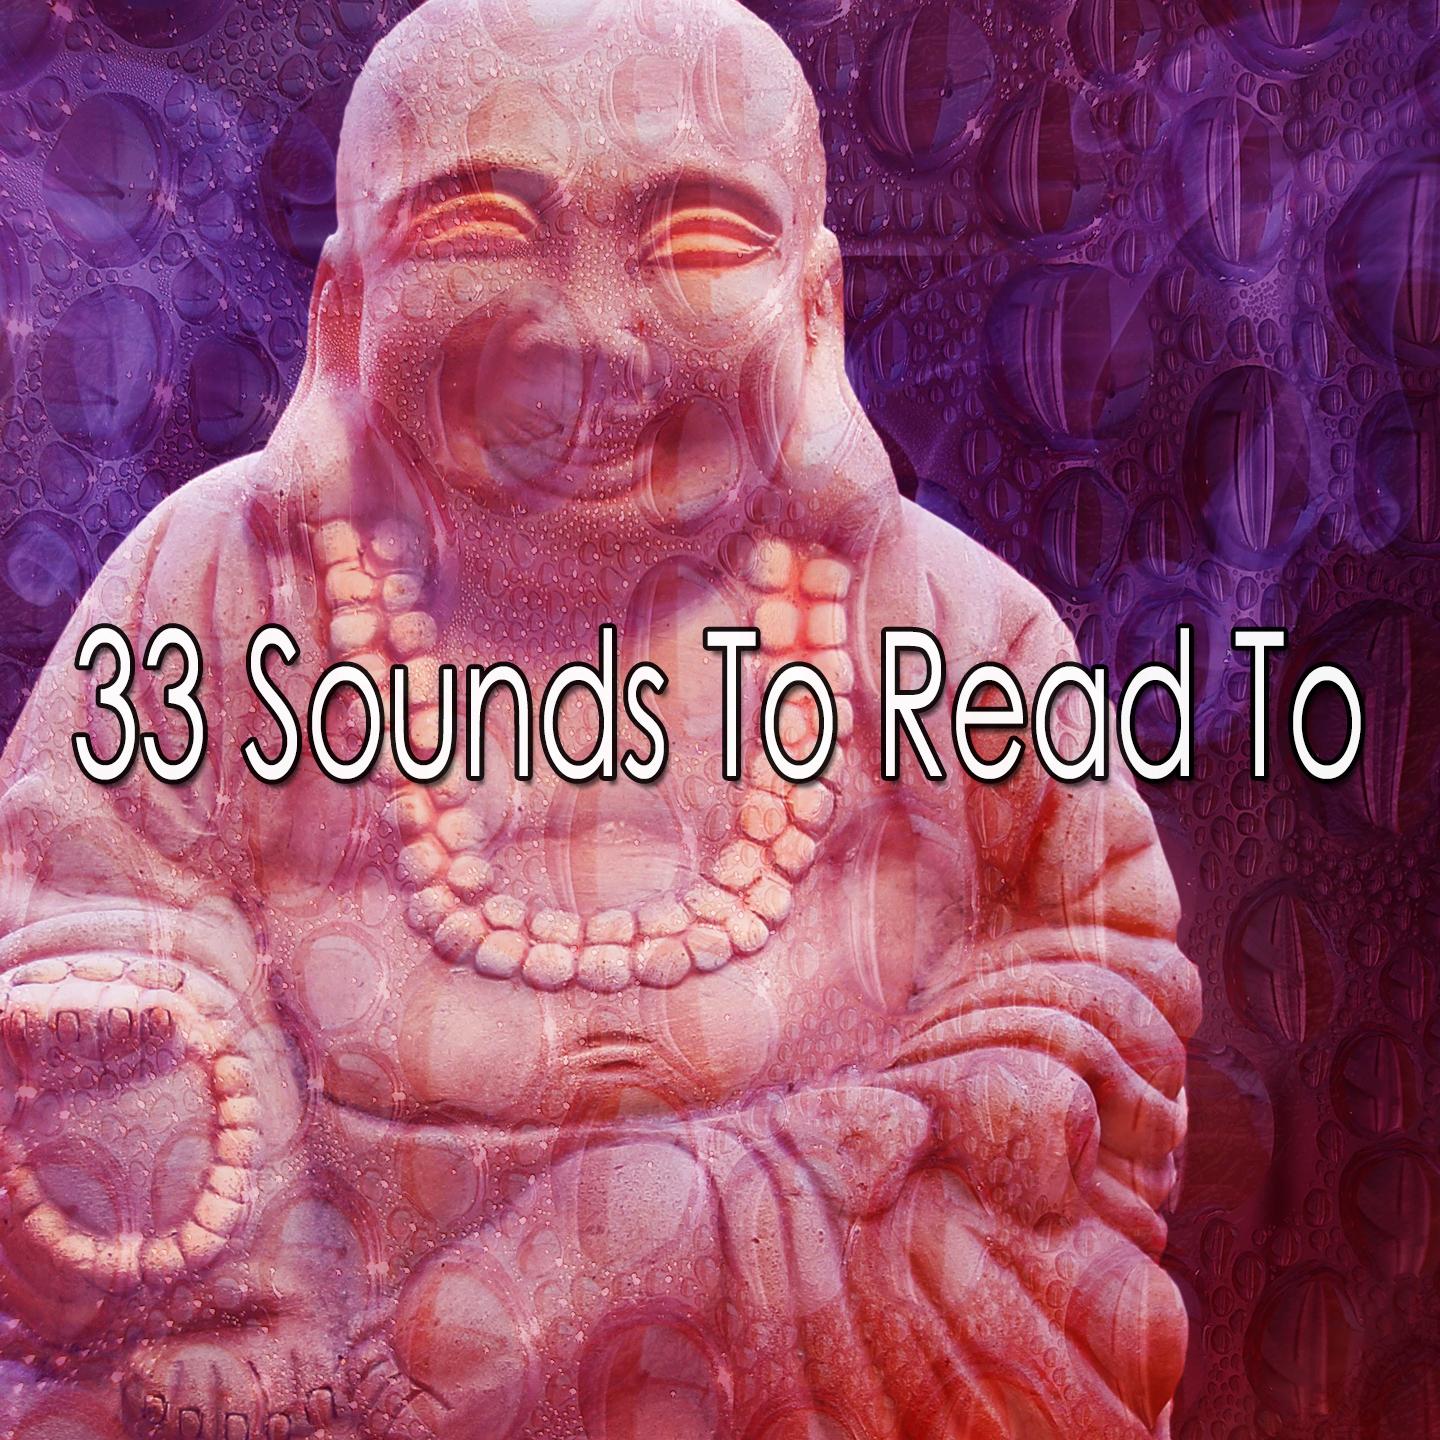 33 Sounds To Read To